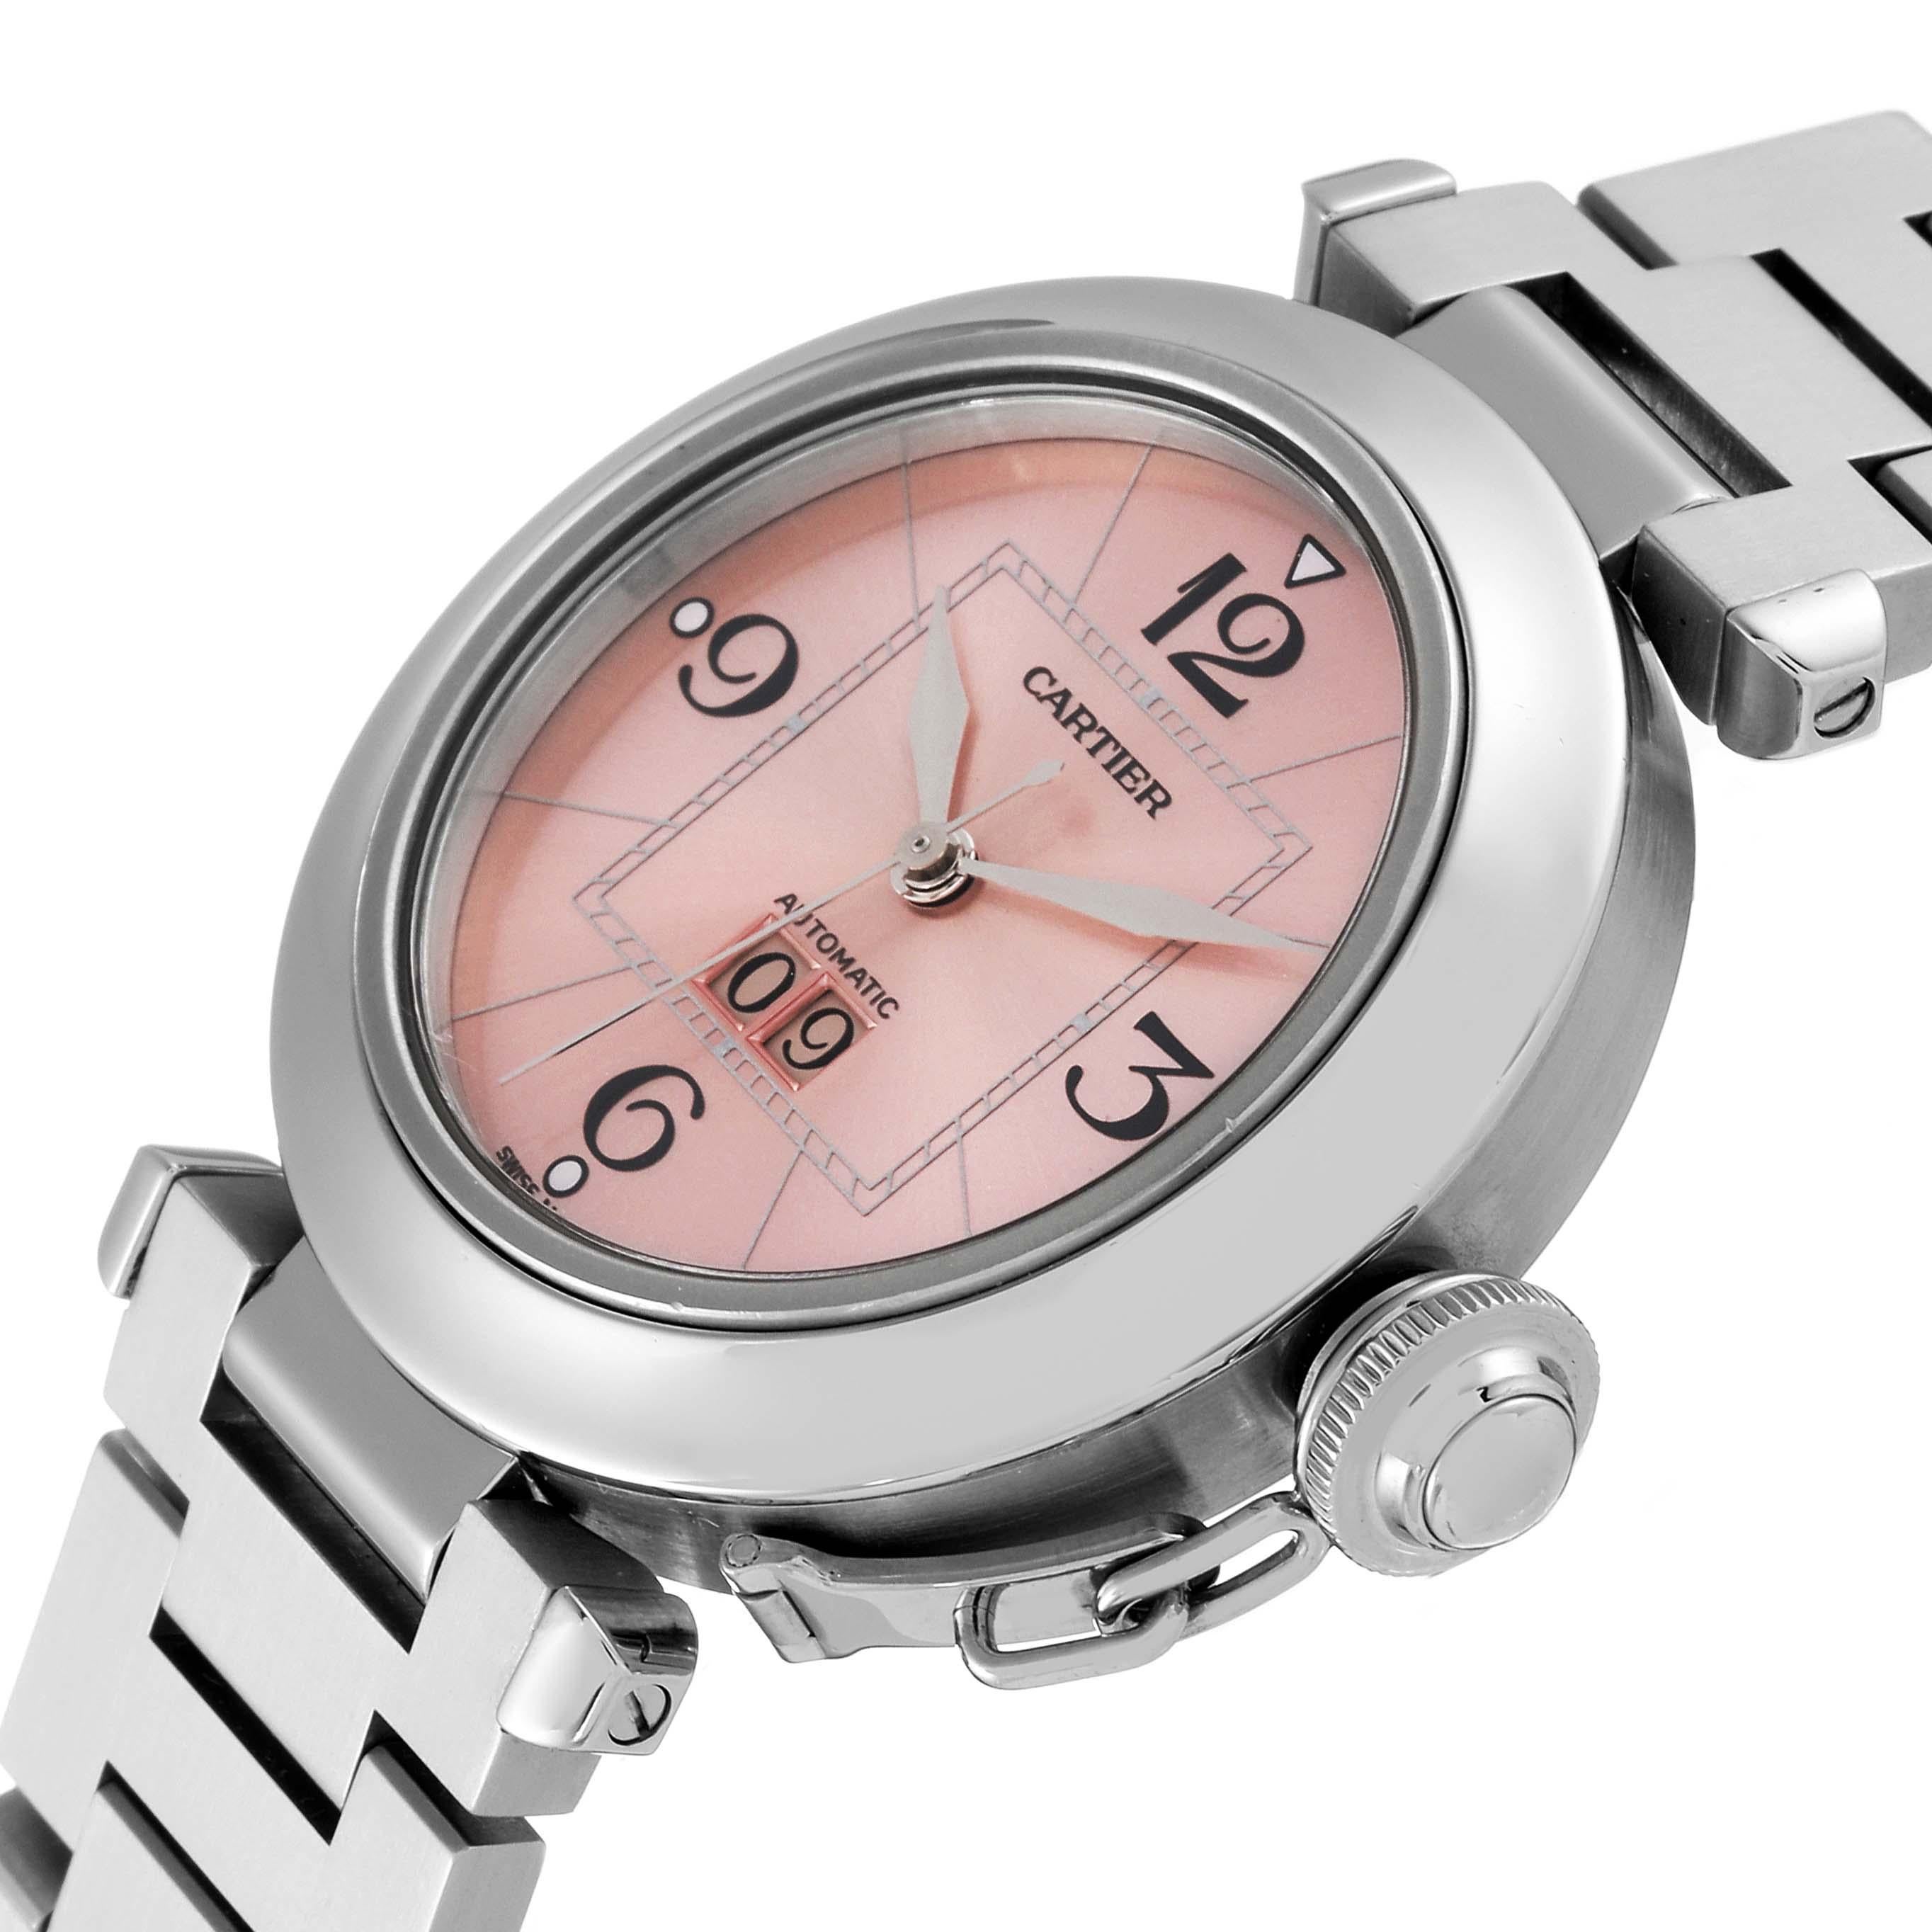 Cartier Pasha Big Date Pink Dial Steel Ladies Watch W31058M7. Automatic self-winding movement. Round stainless steel case 35.0 mm in diameter. Case back with 8 screws. Vendome lugs. Winding-crown protection cap. Stainless steel concave bezel.